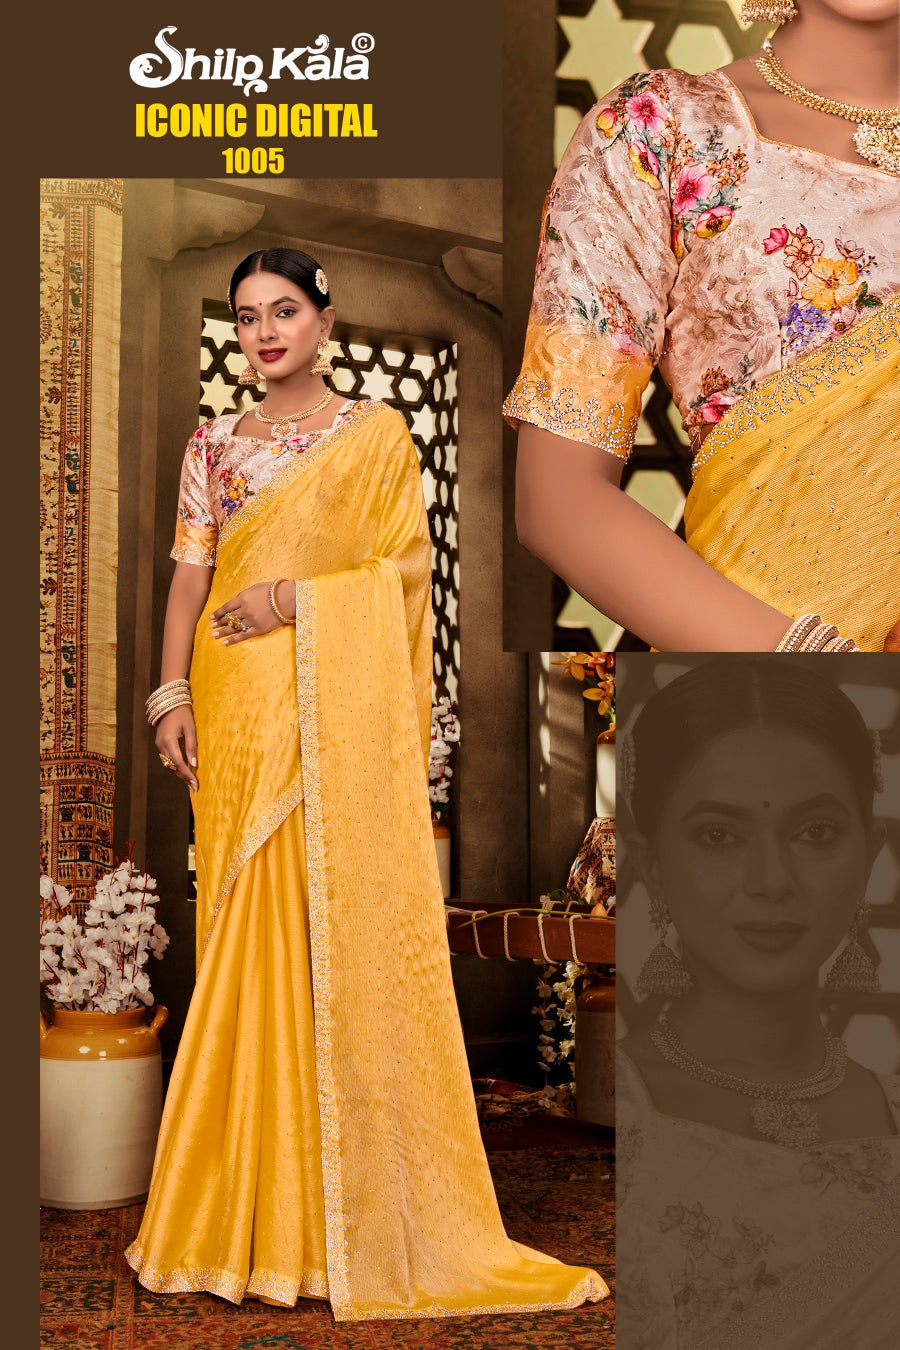 Iconic Shilpkala Saree with Jarkan Stone Work and Digital Shifli Blouse with Sequence Work